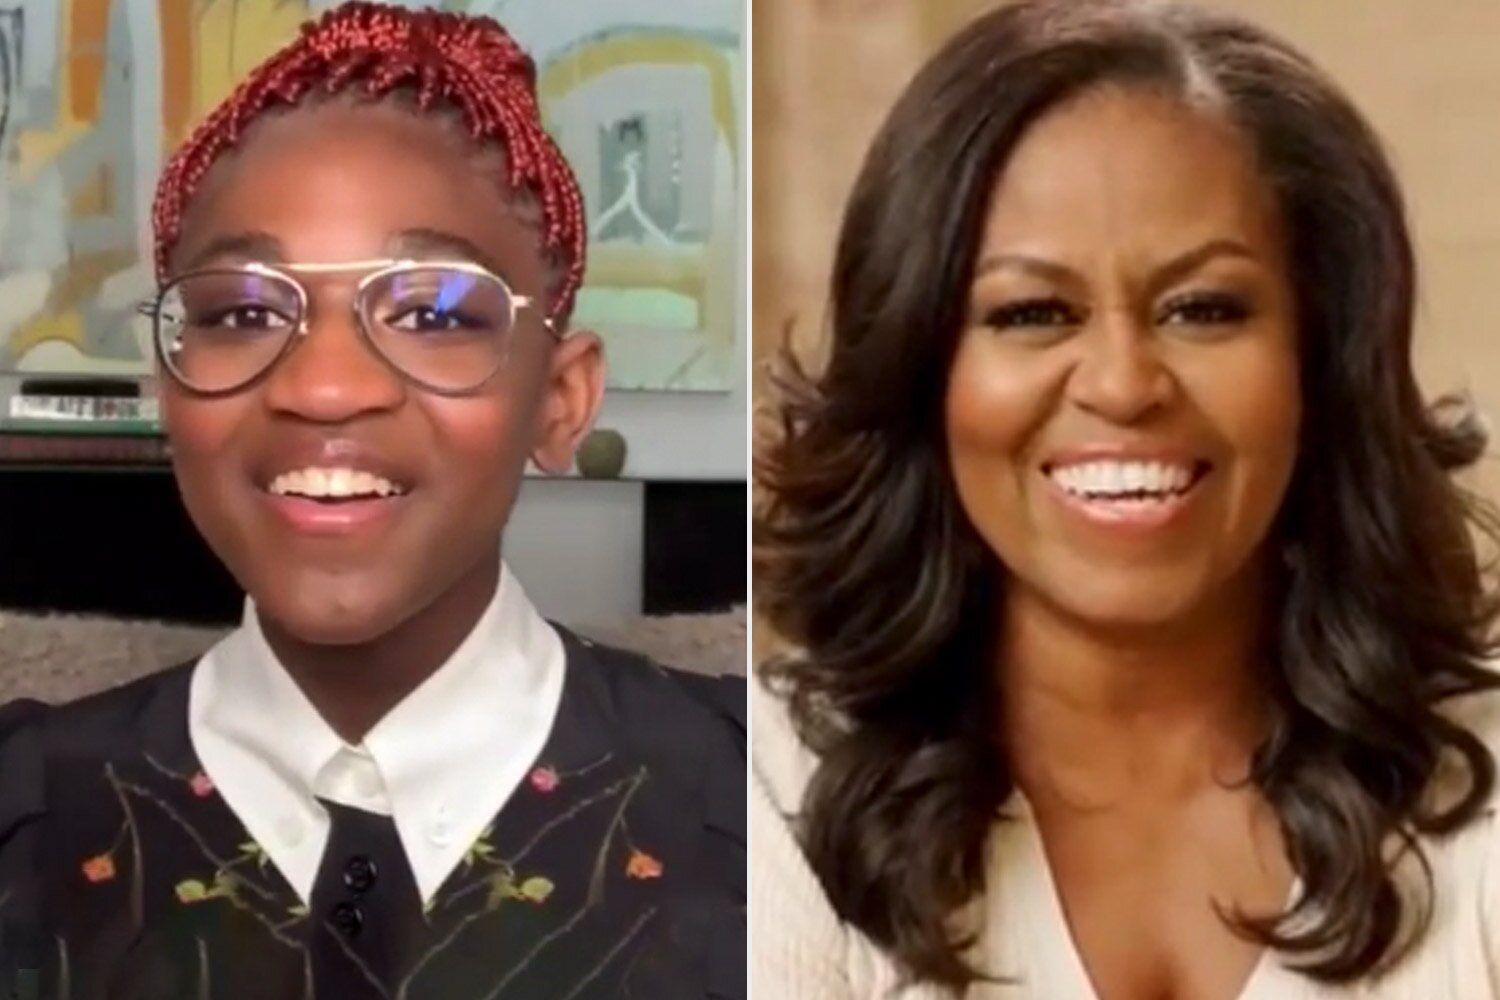 Michelle Obama Praises Zaya Wade for Being a Role Model during a Touching Interview